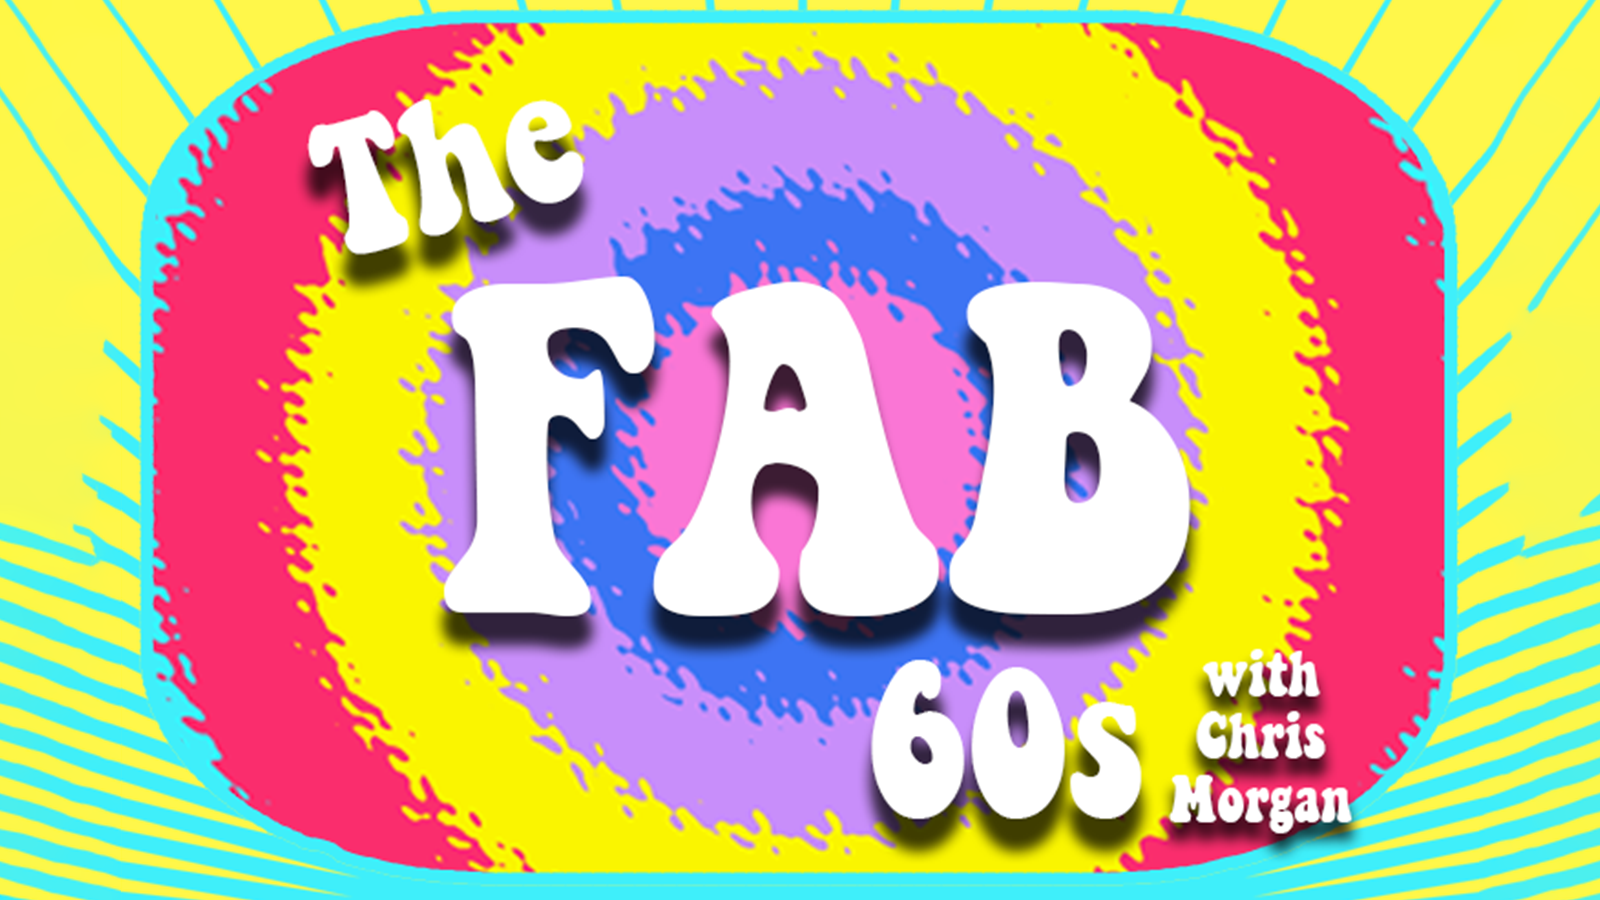 The Fab 60s